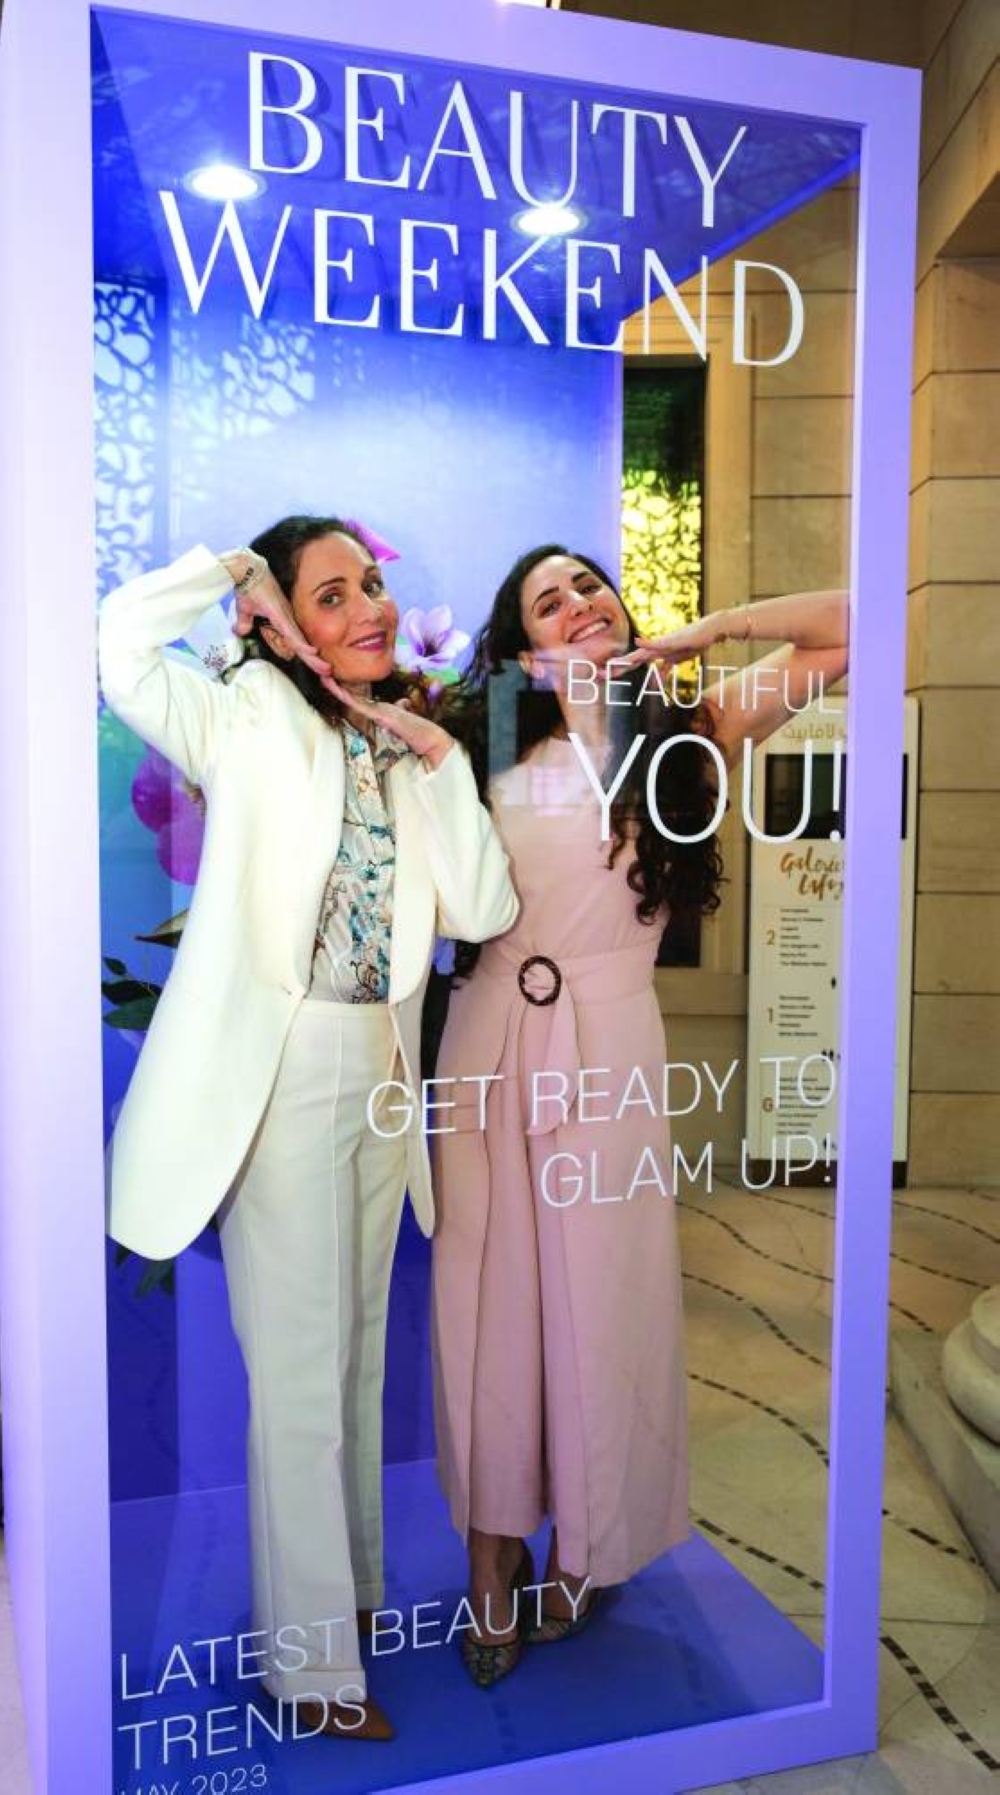 Glimpses from the ‘Beauty Weekend’ at Galeries Lafayette Doha.